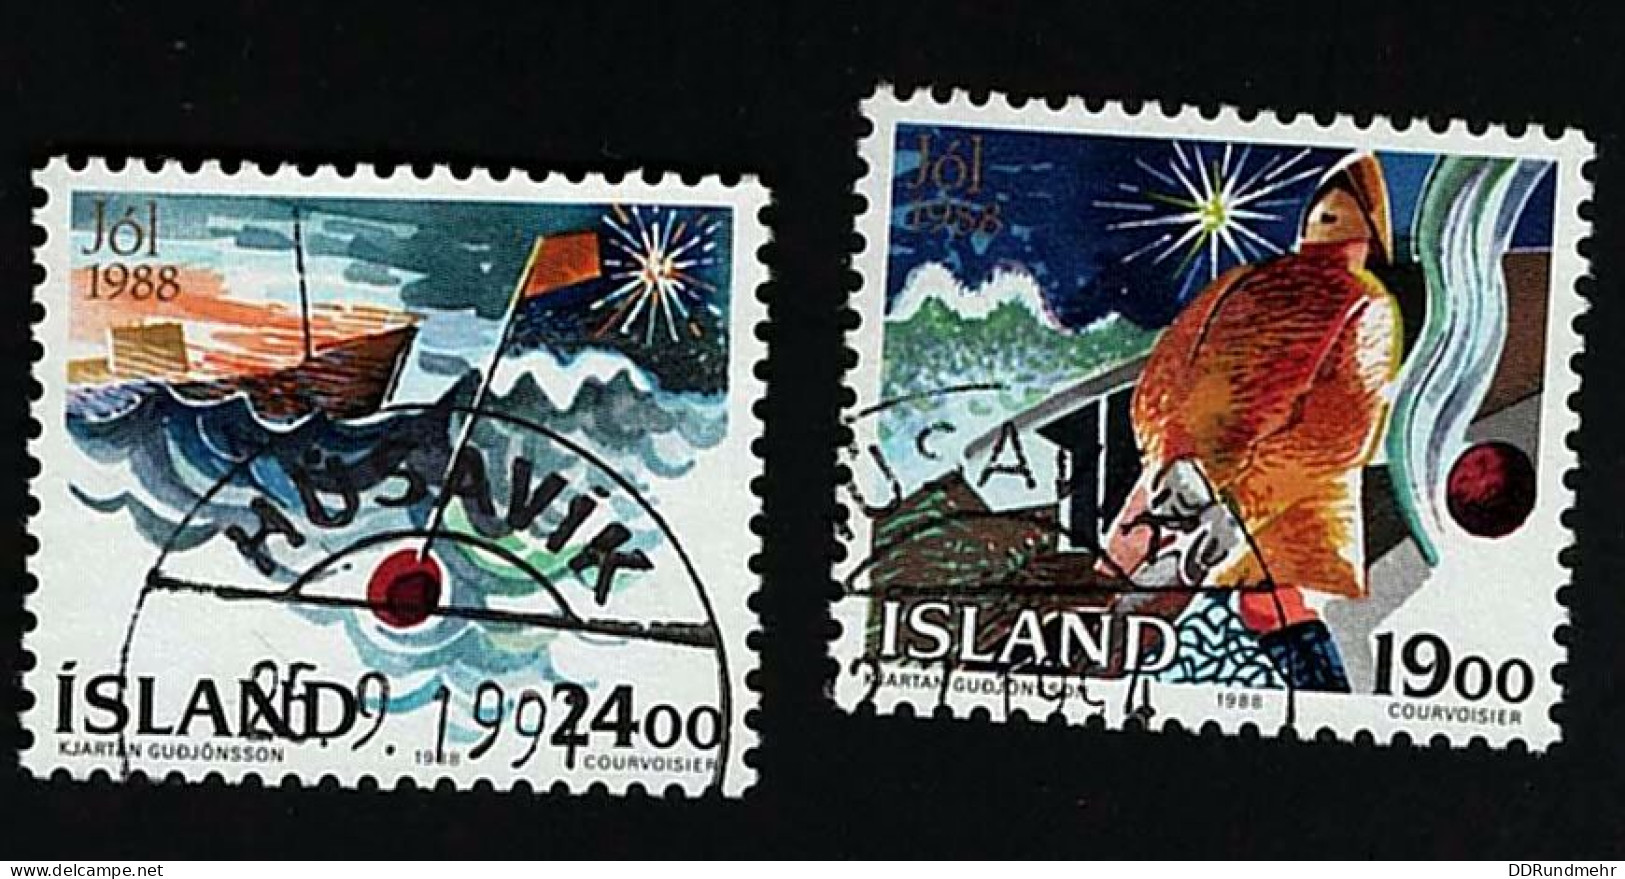 1988 Christmas Michel IS 695 - 696 Stamp Number IS 669 - 670 Yvert Et Tellier IS 648 - 649 Used - Used Stamps